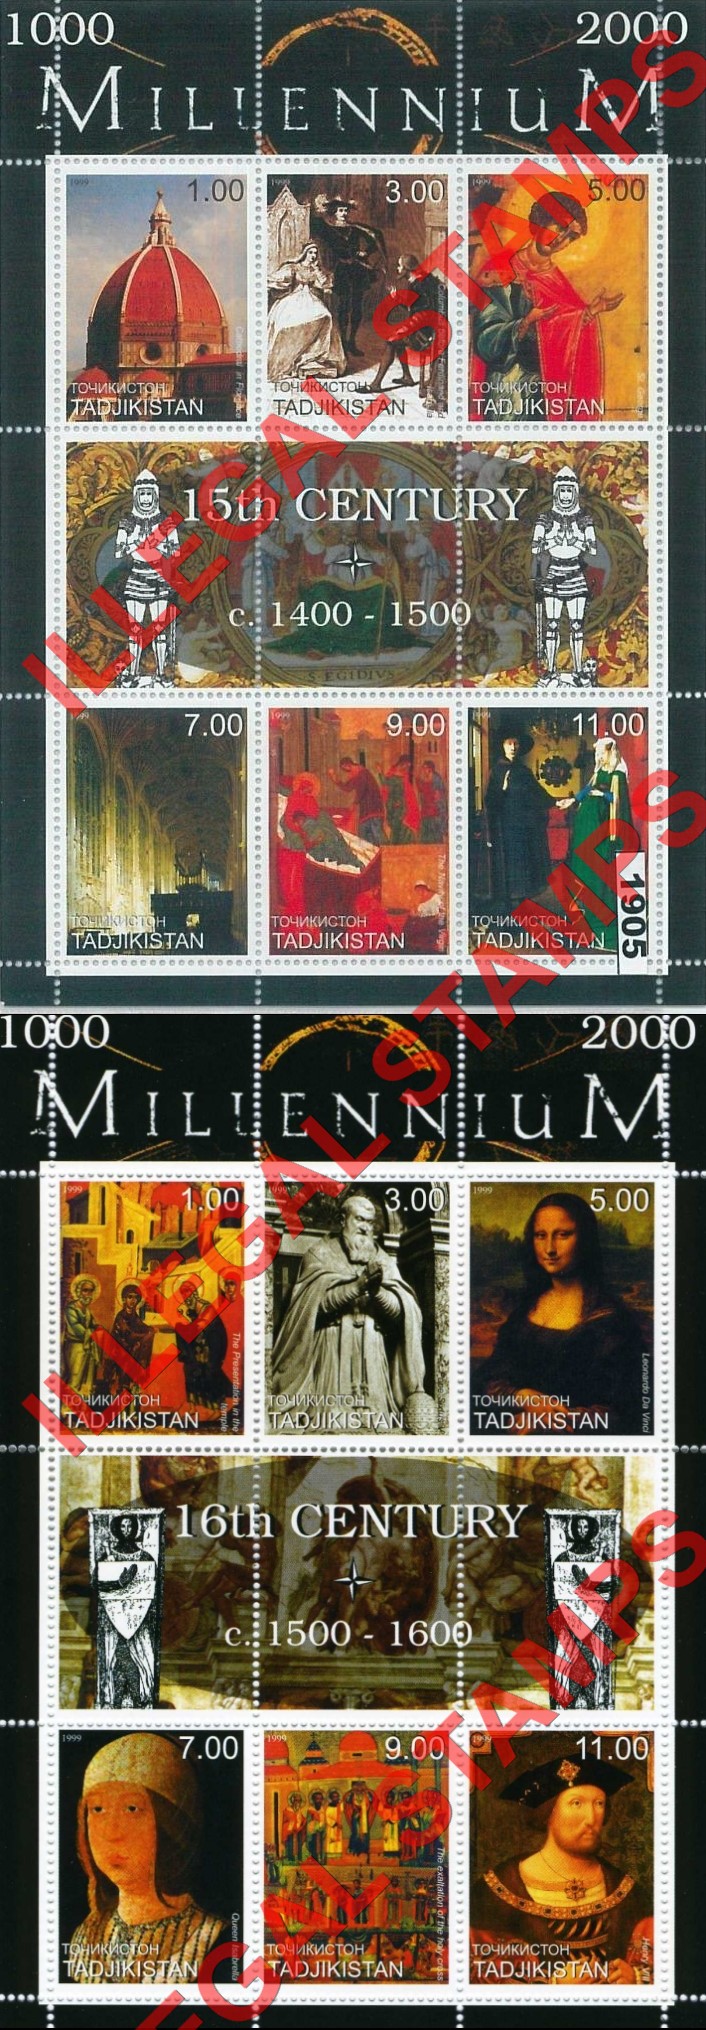 Tajikistan 1999 Millennium 15th and 16th Century Illegal Stamp Souvenir Sheets of 9